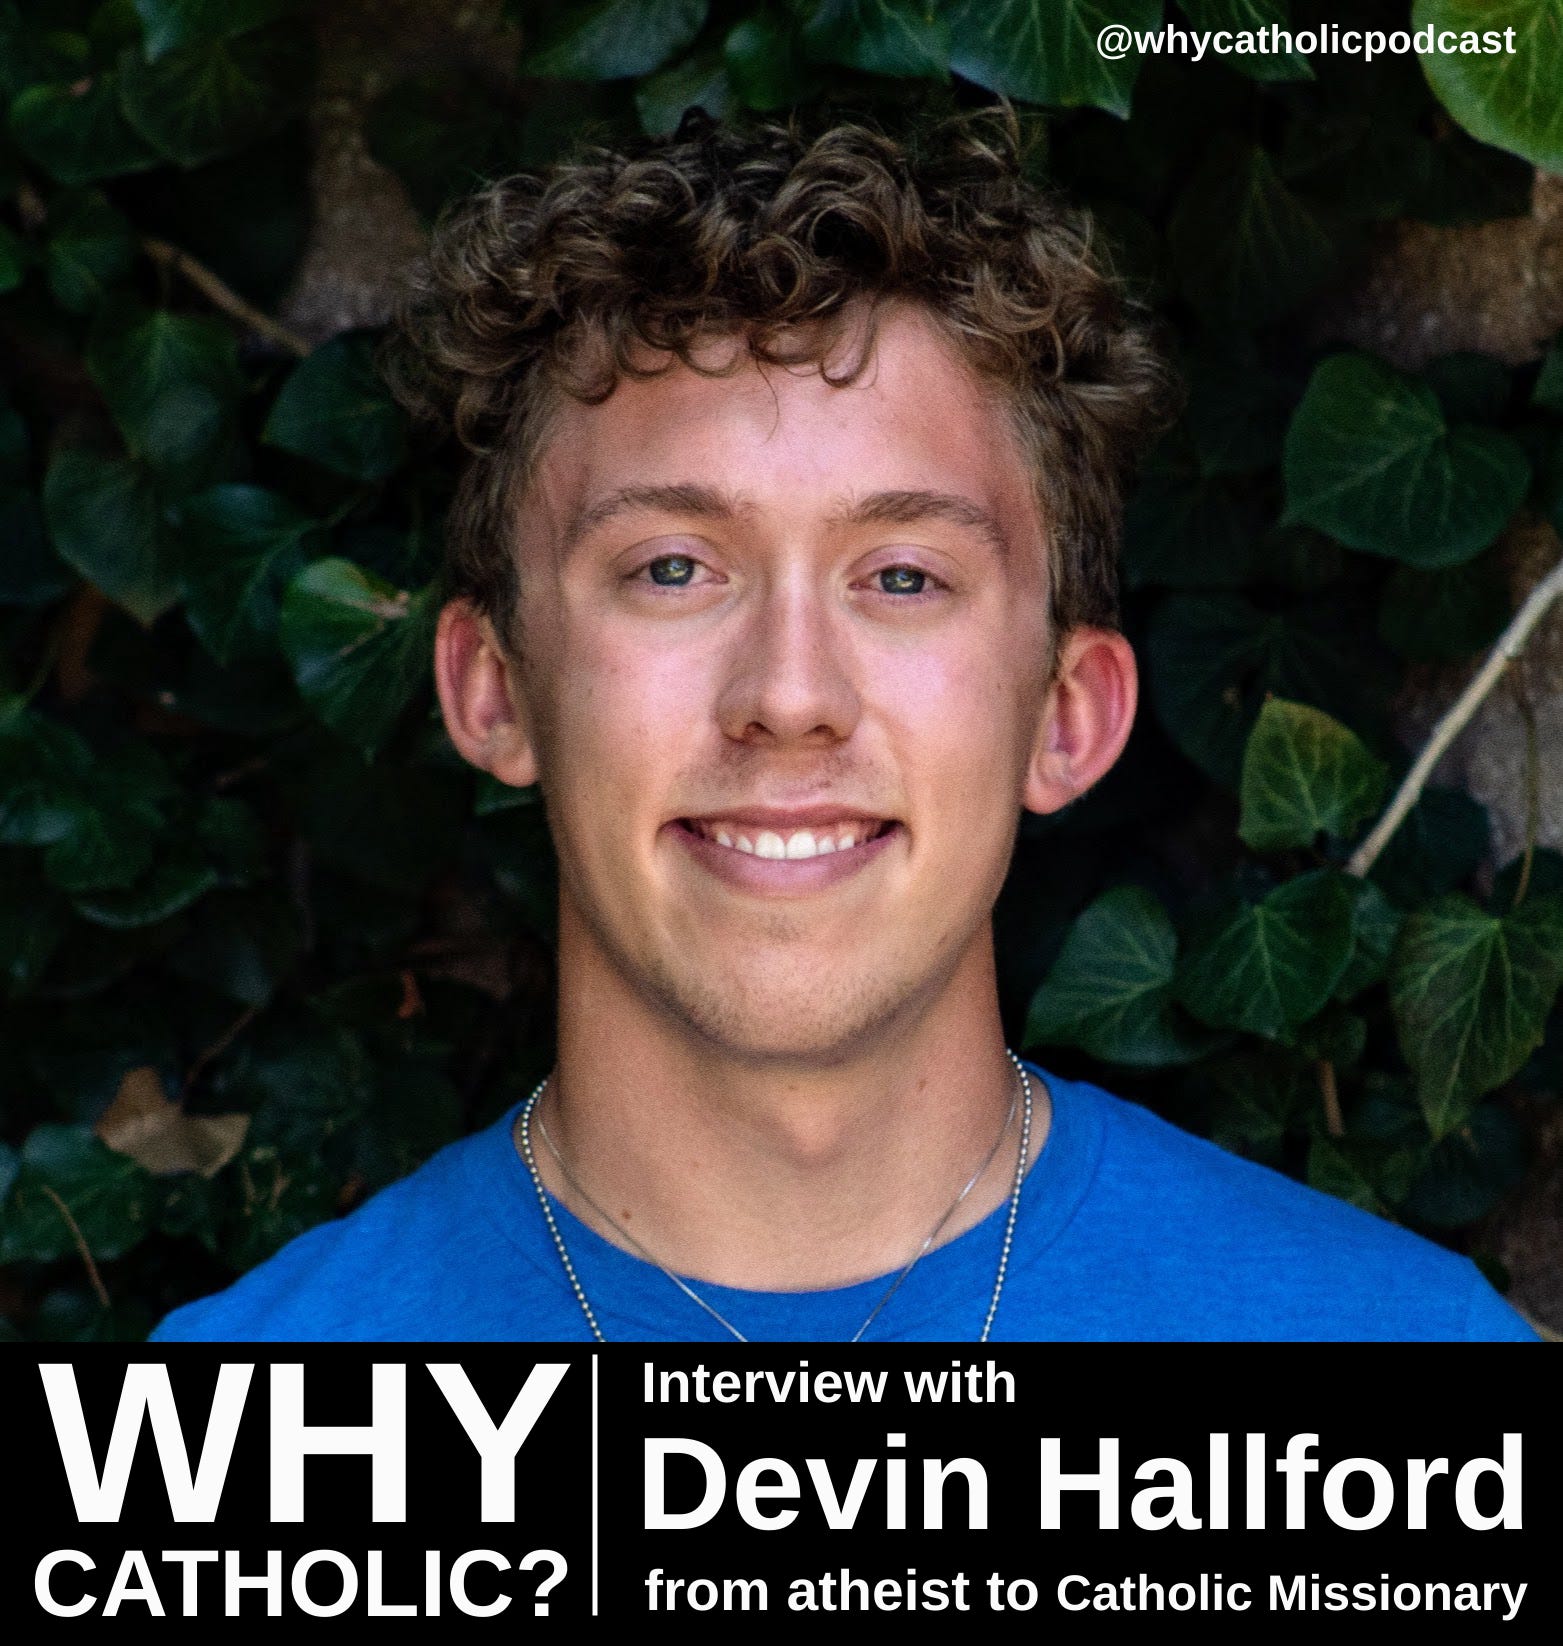 #13 - Interview with Devin Halford - From Atheist to Catholic Missionary